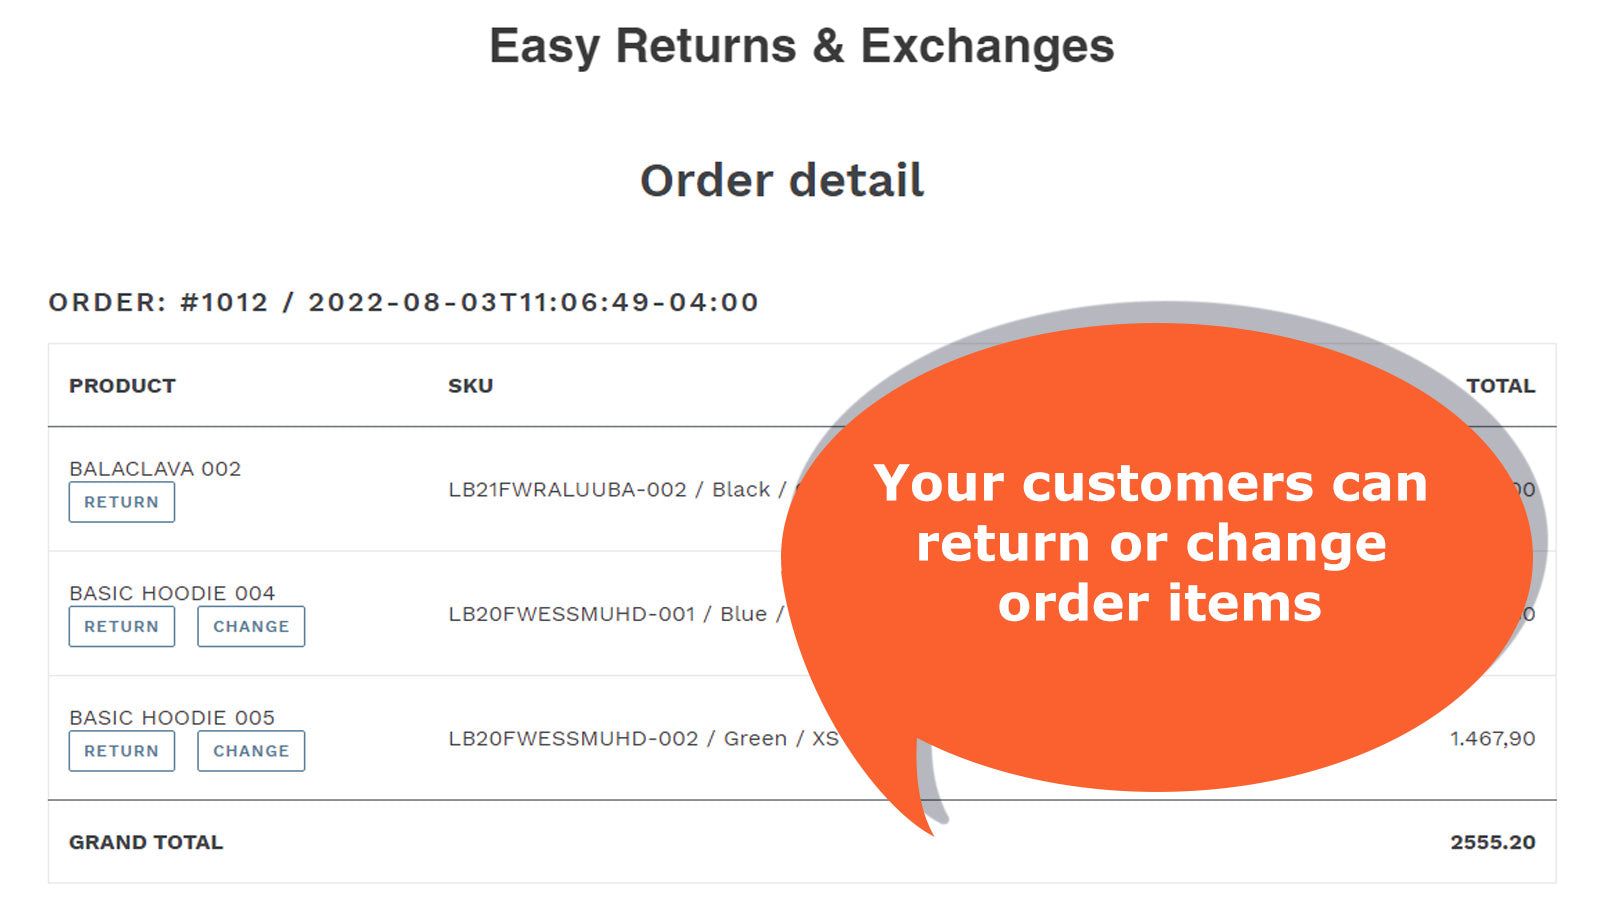 Your customers can return or change orders